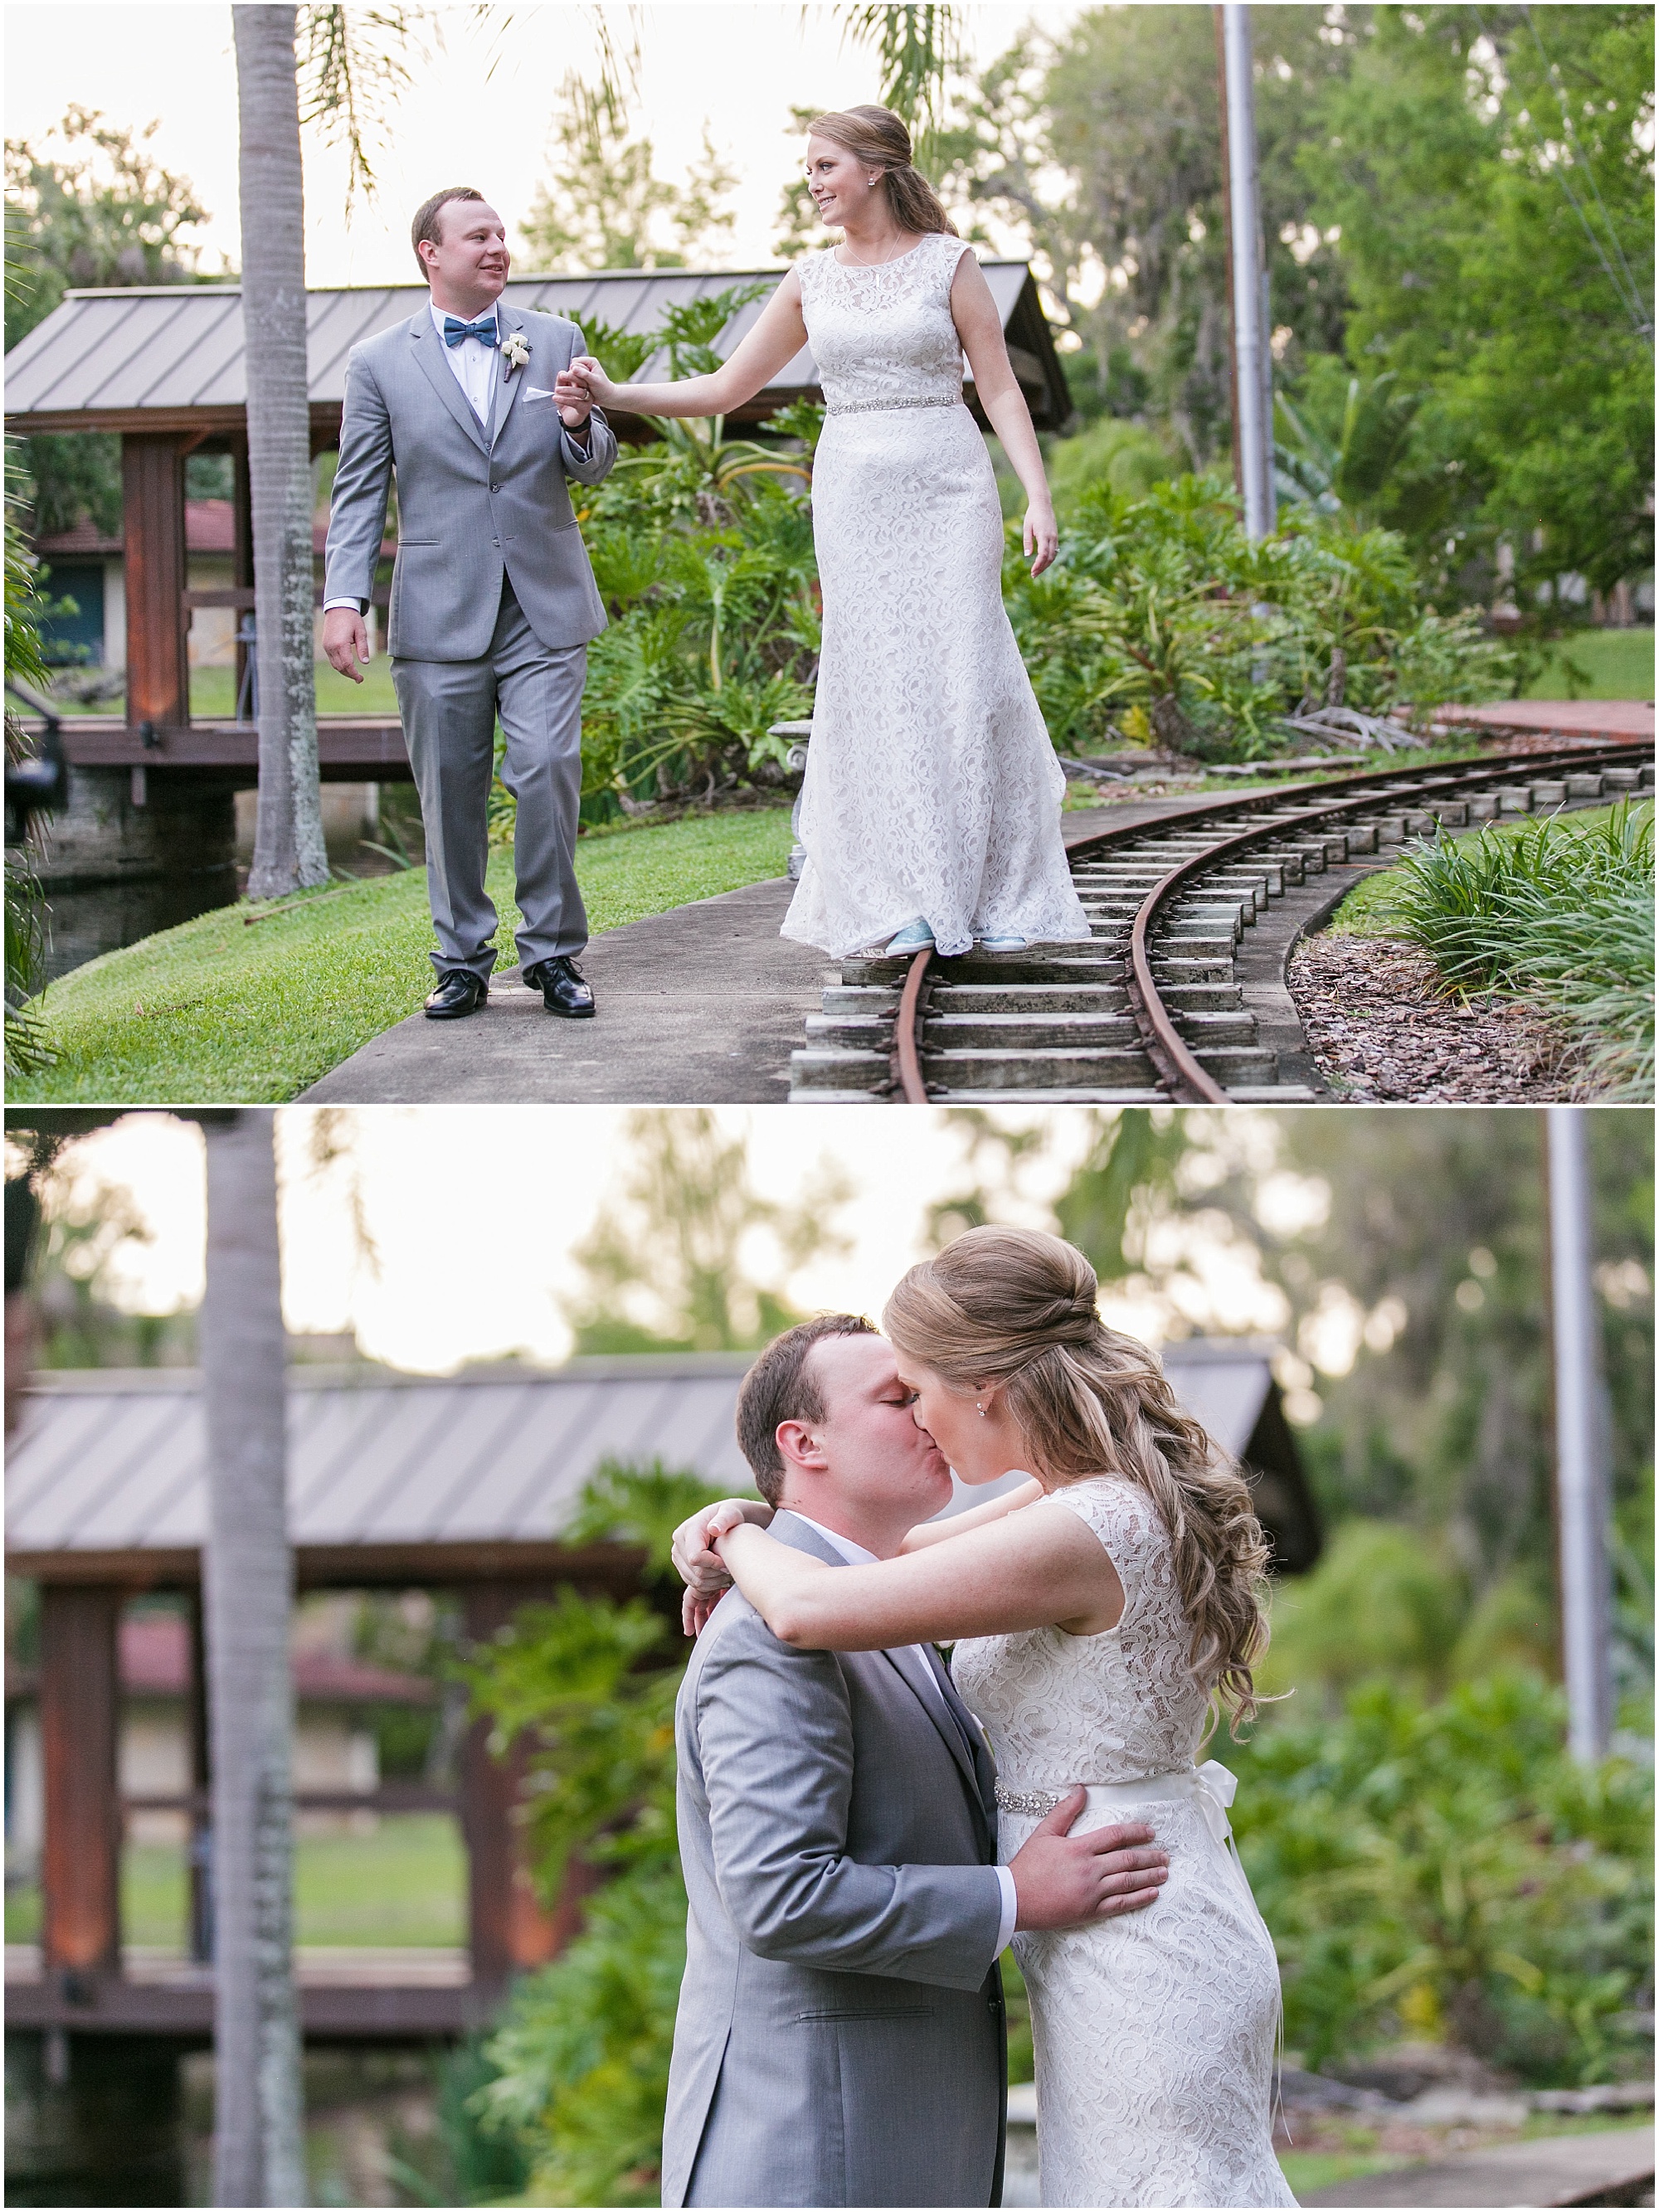 Groom holding his brides hand while she walks on railroad tracks and then he kisses her.